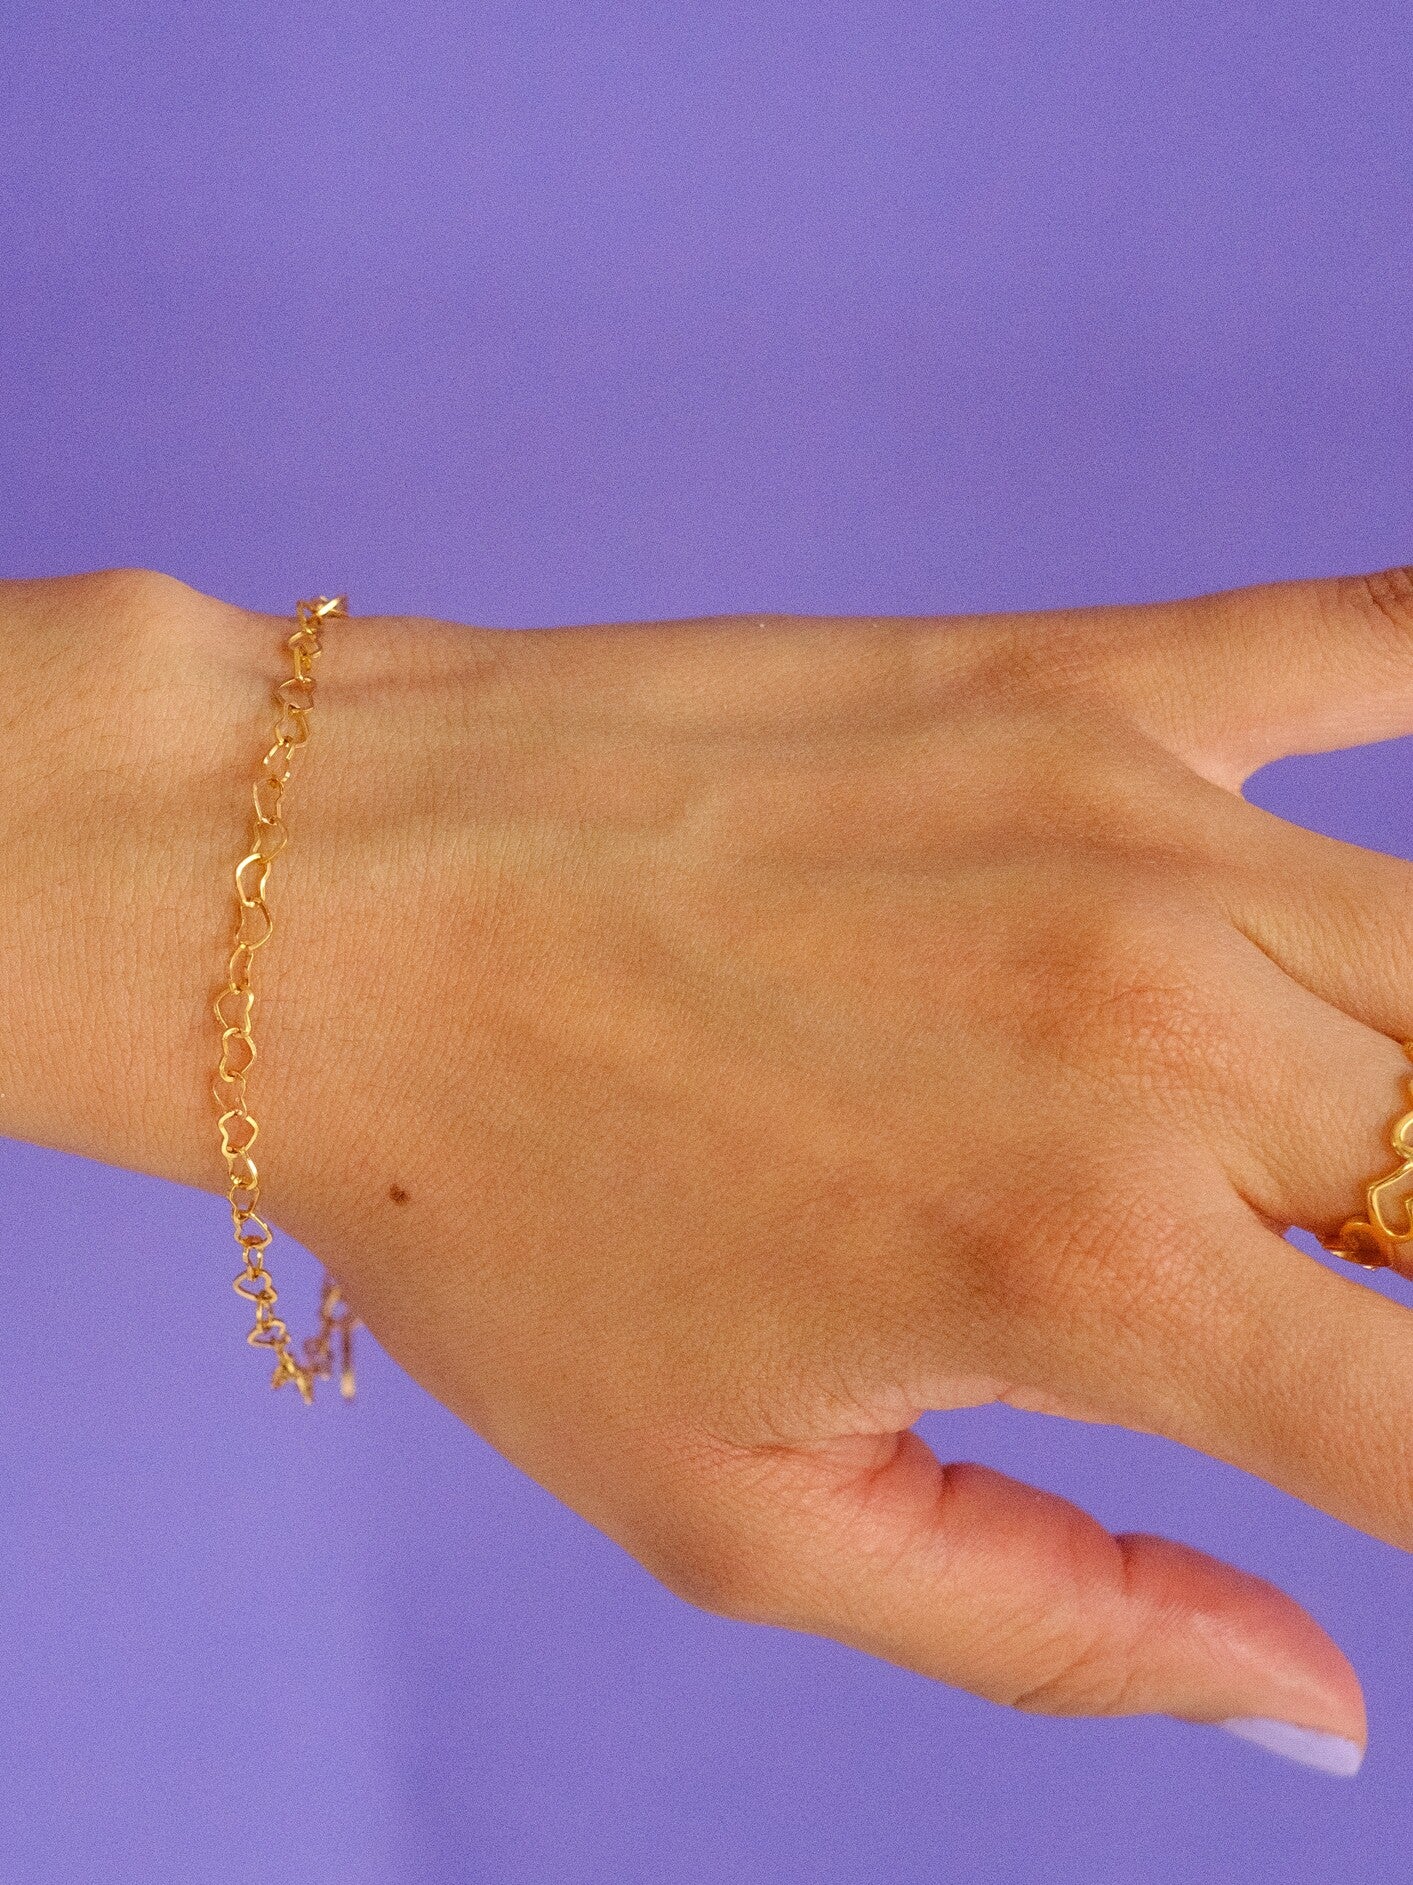 Woman's wrist against a purple background, wearing a gold bracelet with heart shaped links